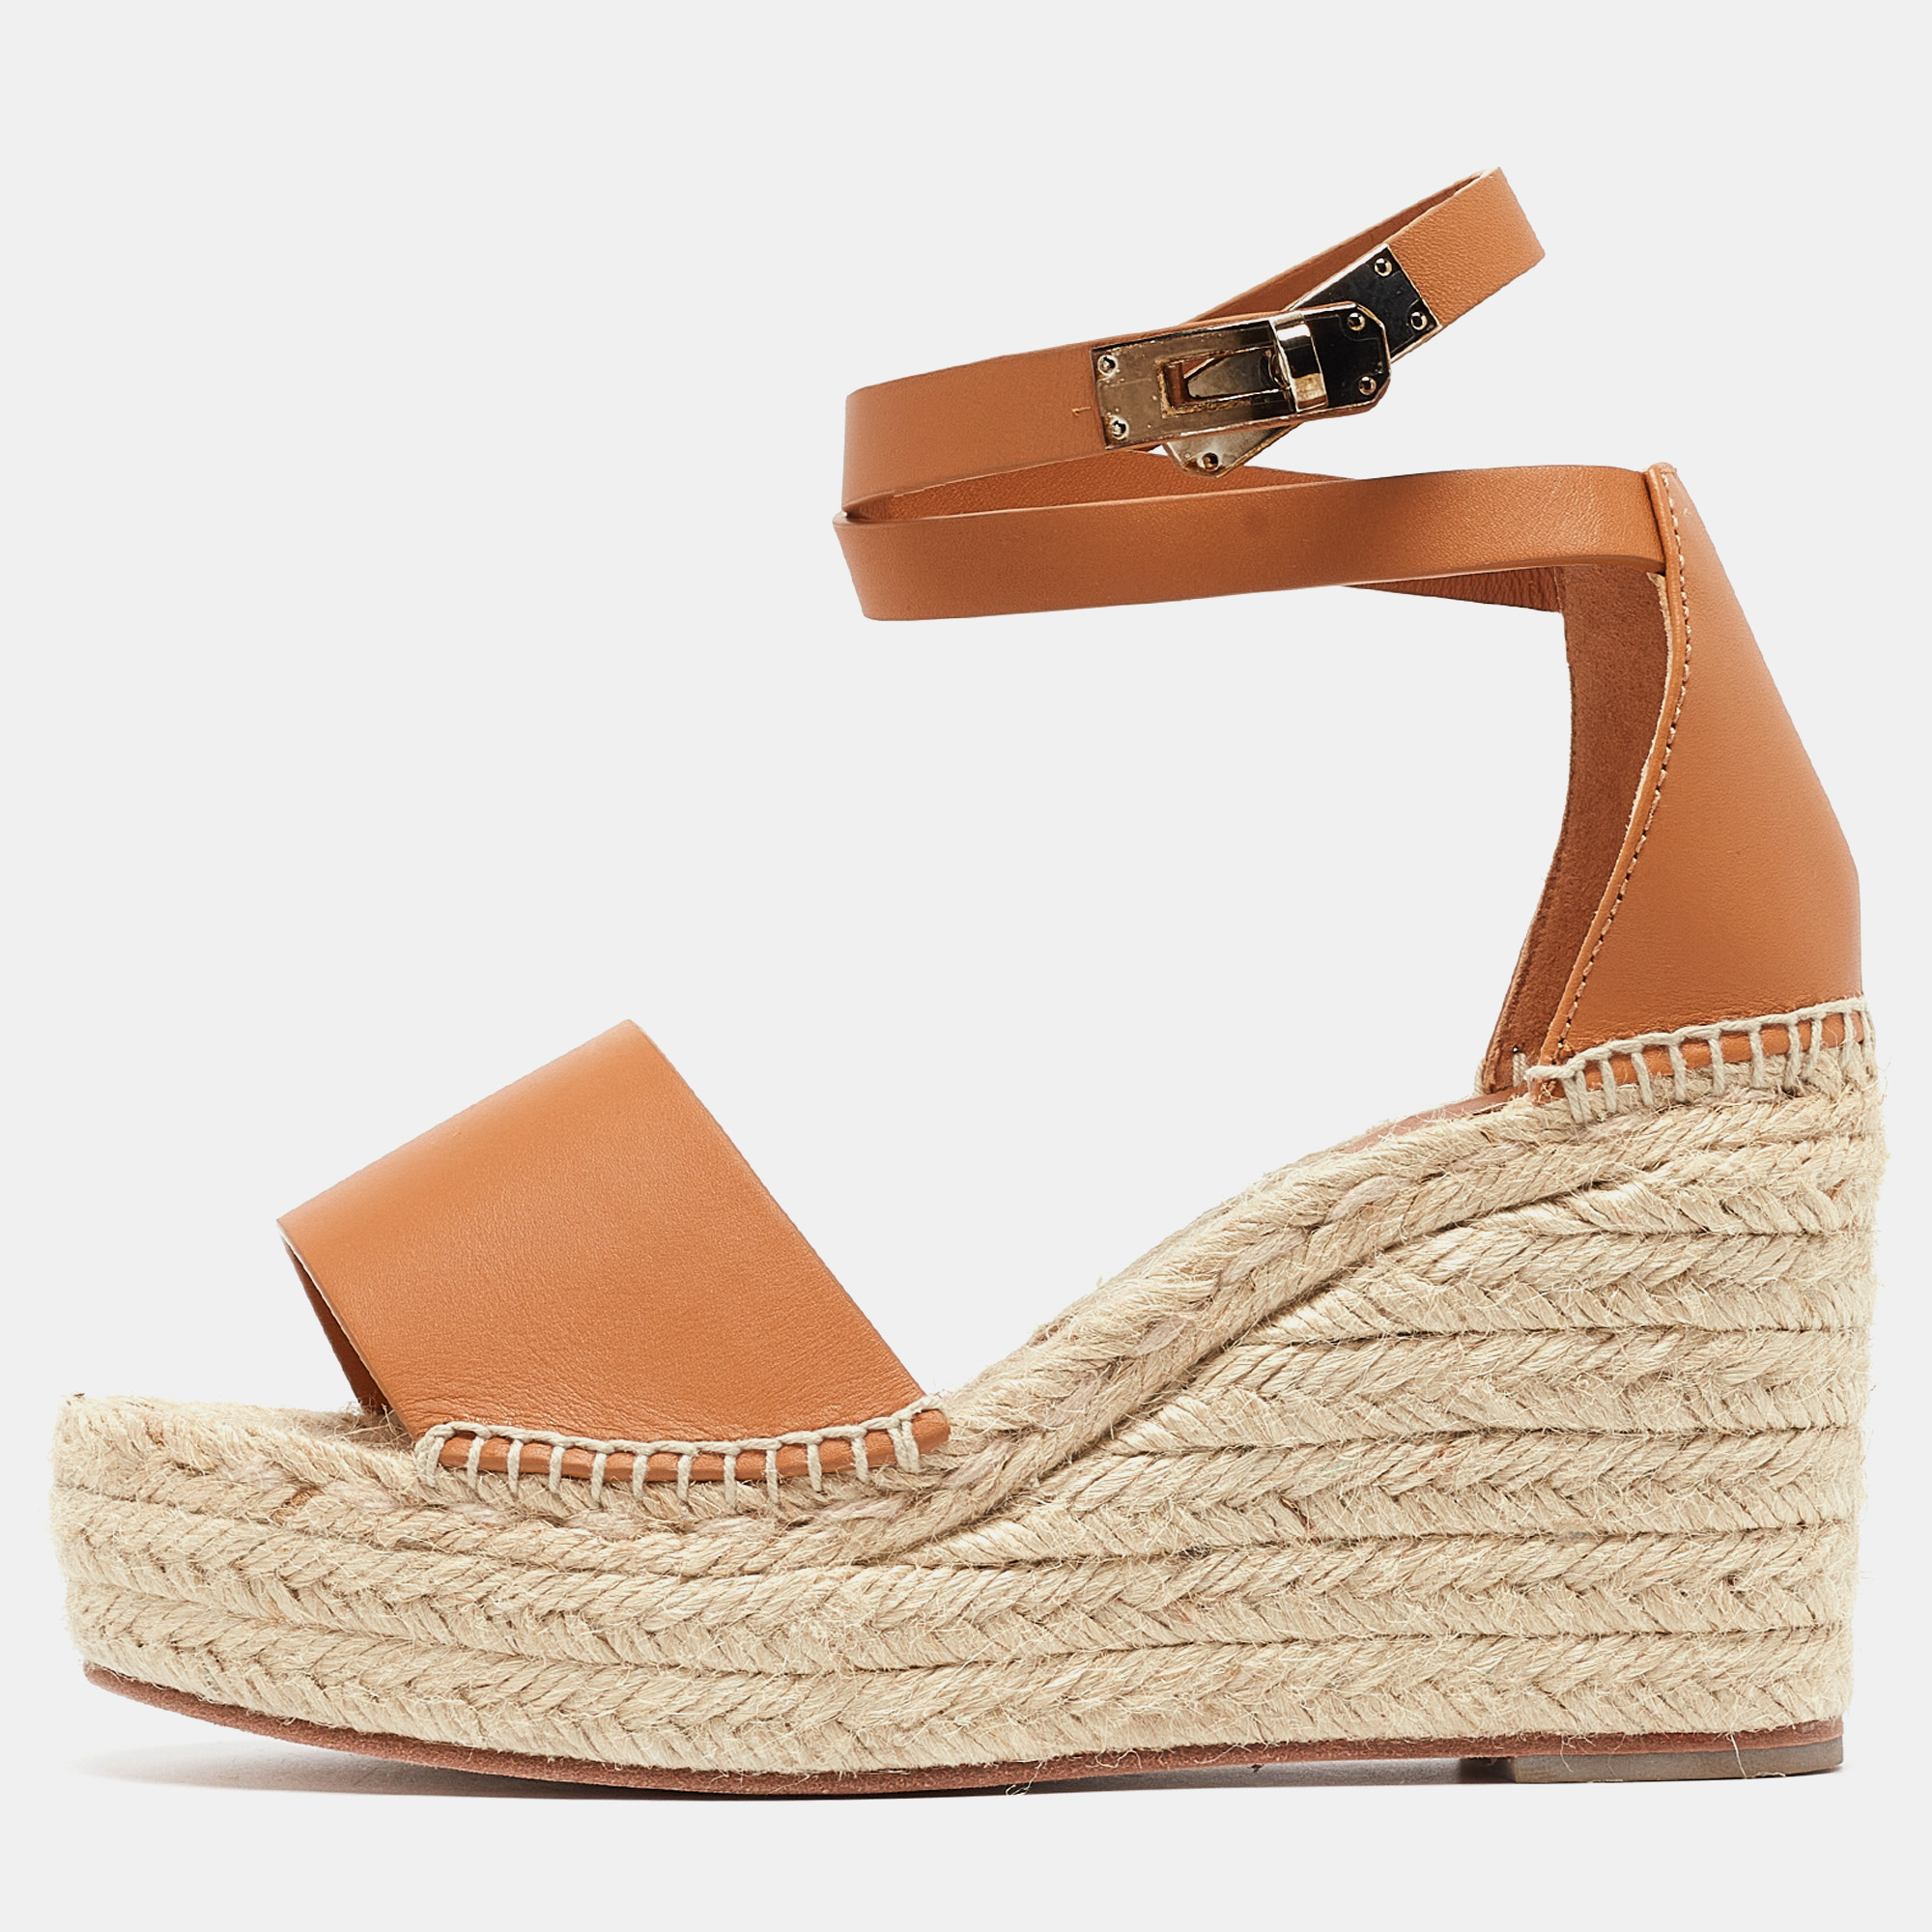 Whether youre into high style comfort or both these lovely wedges will never disappoint. They feature a chic silhouette and an eye pleasing hue. Make this pair yours today